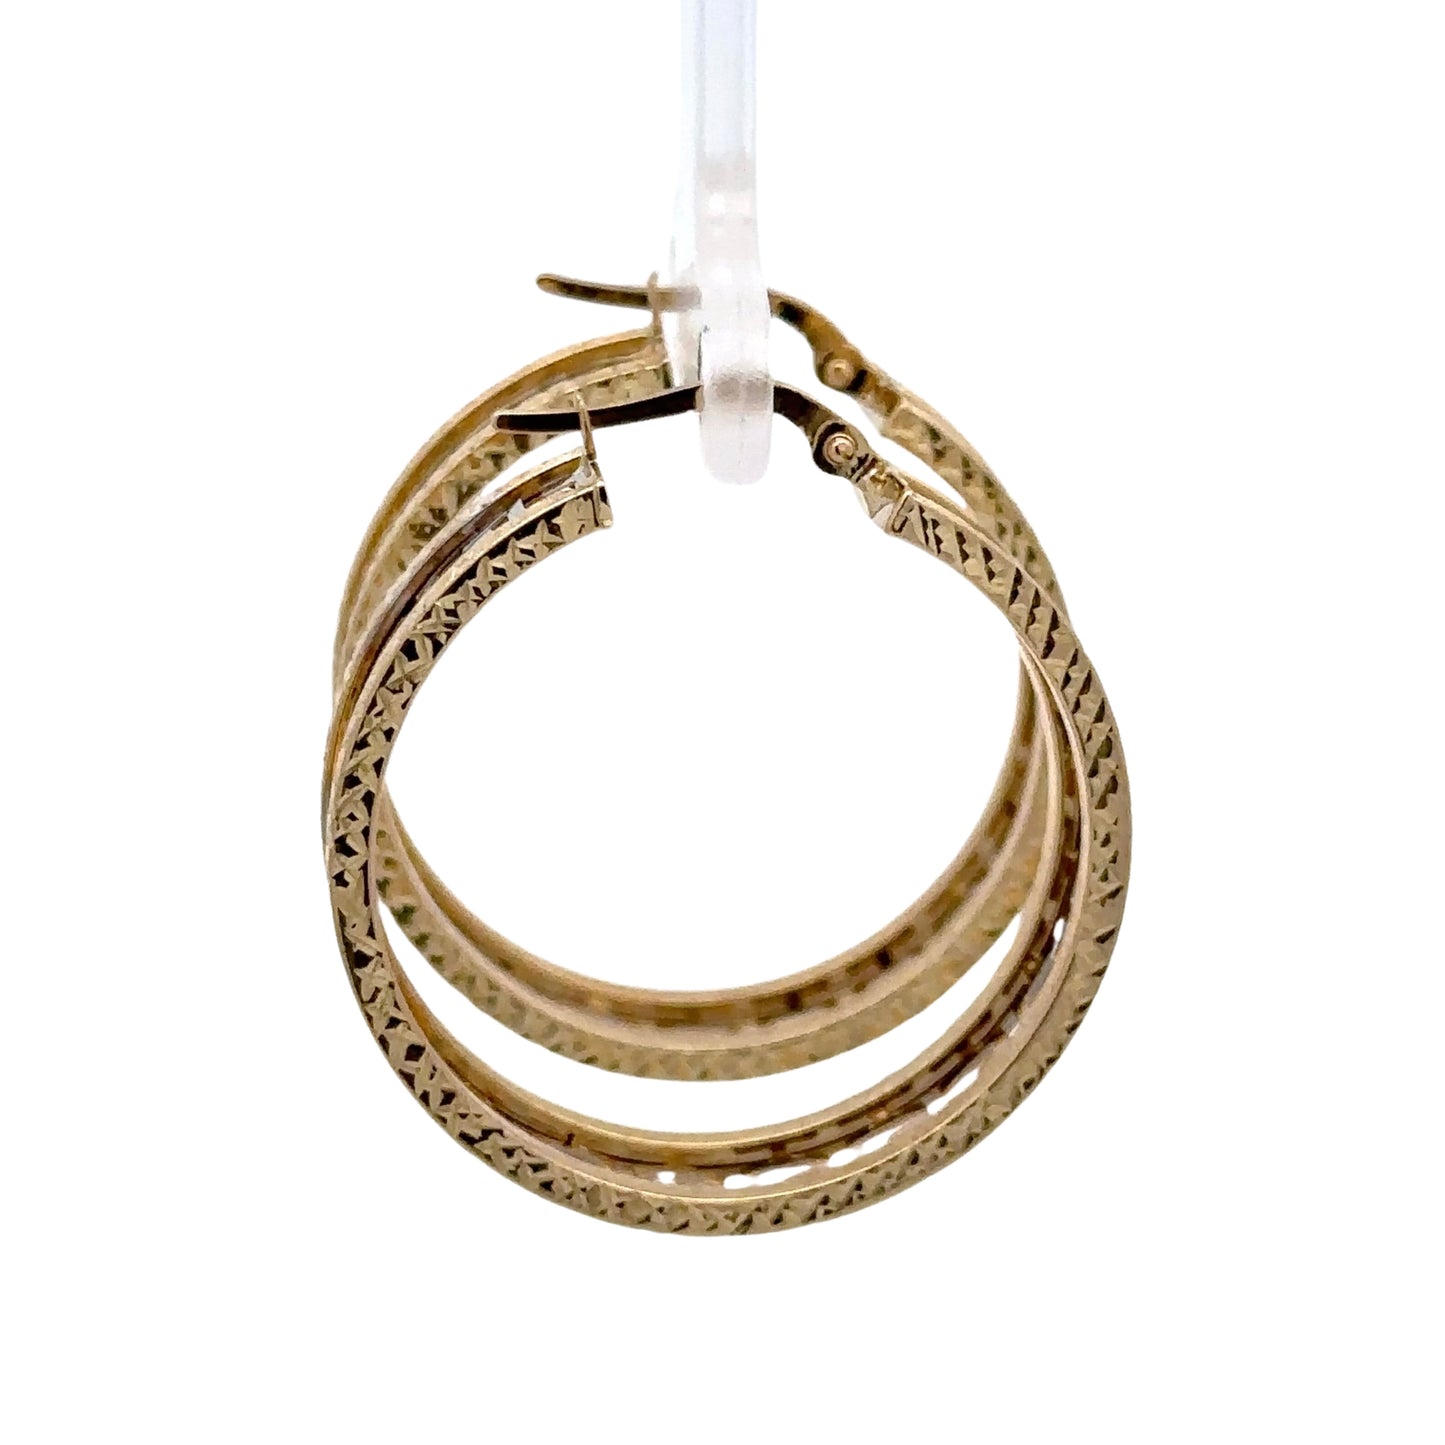 Side of 2 toned hoops showing yellow gold on side